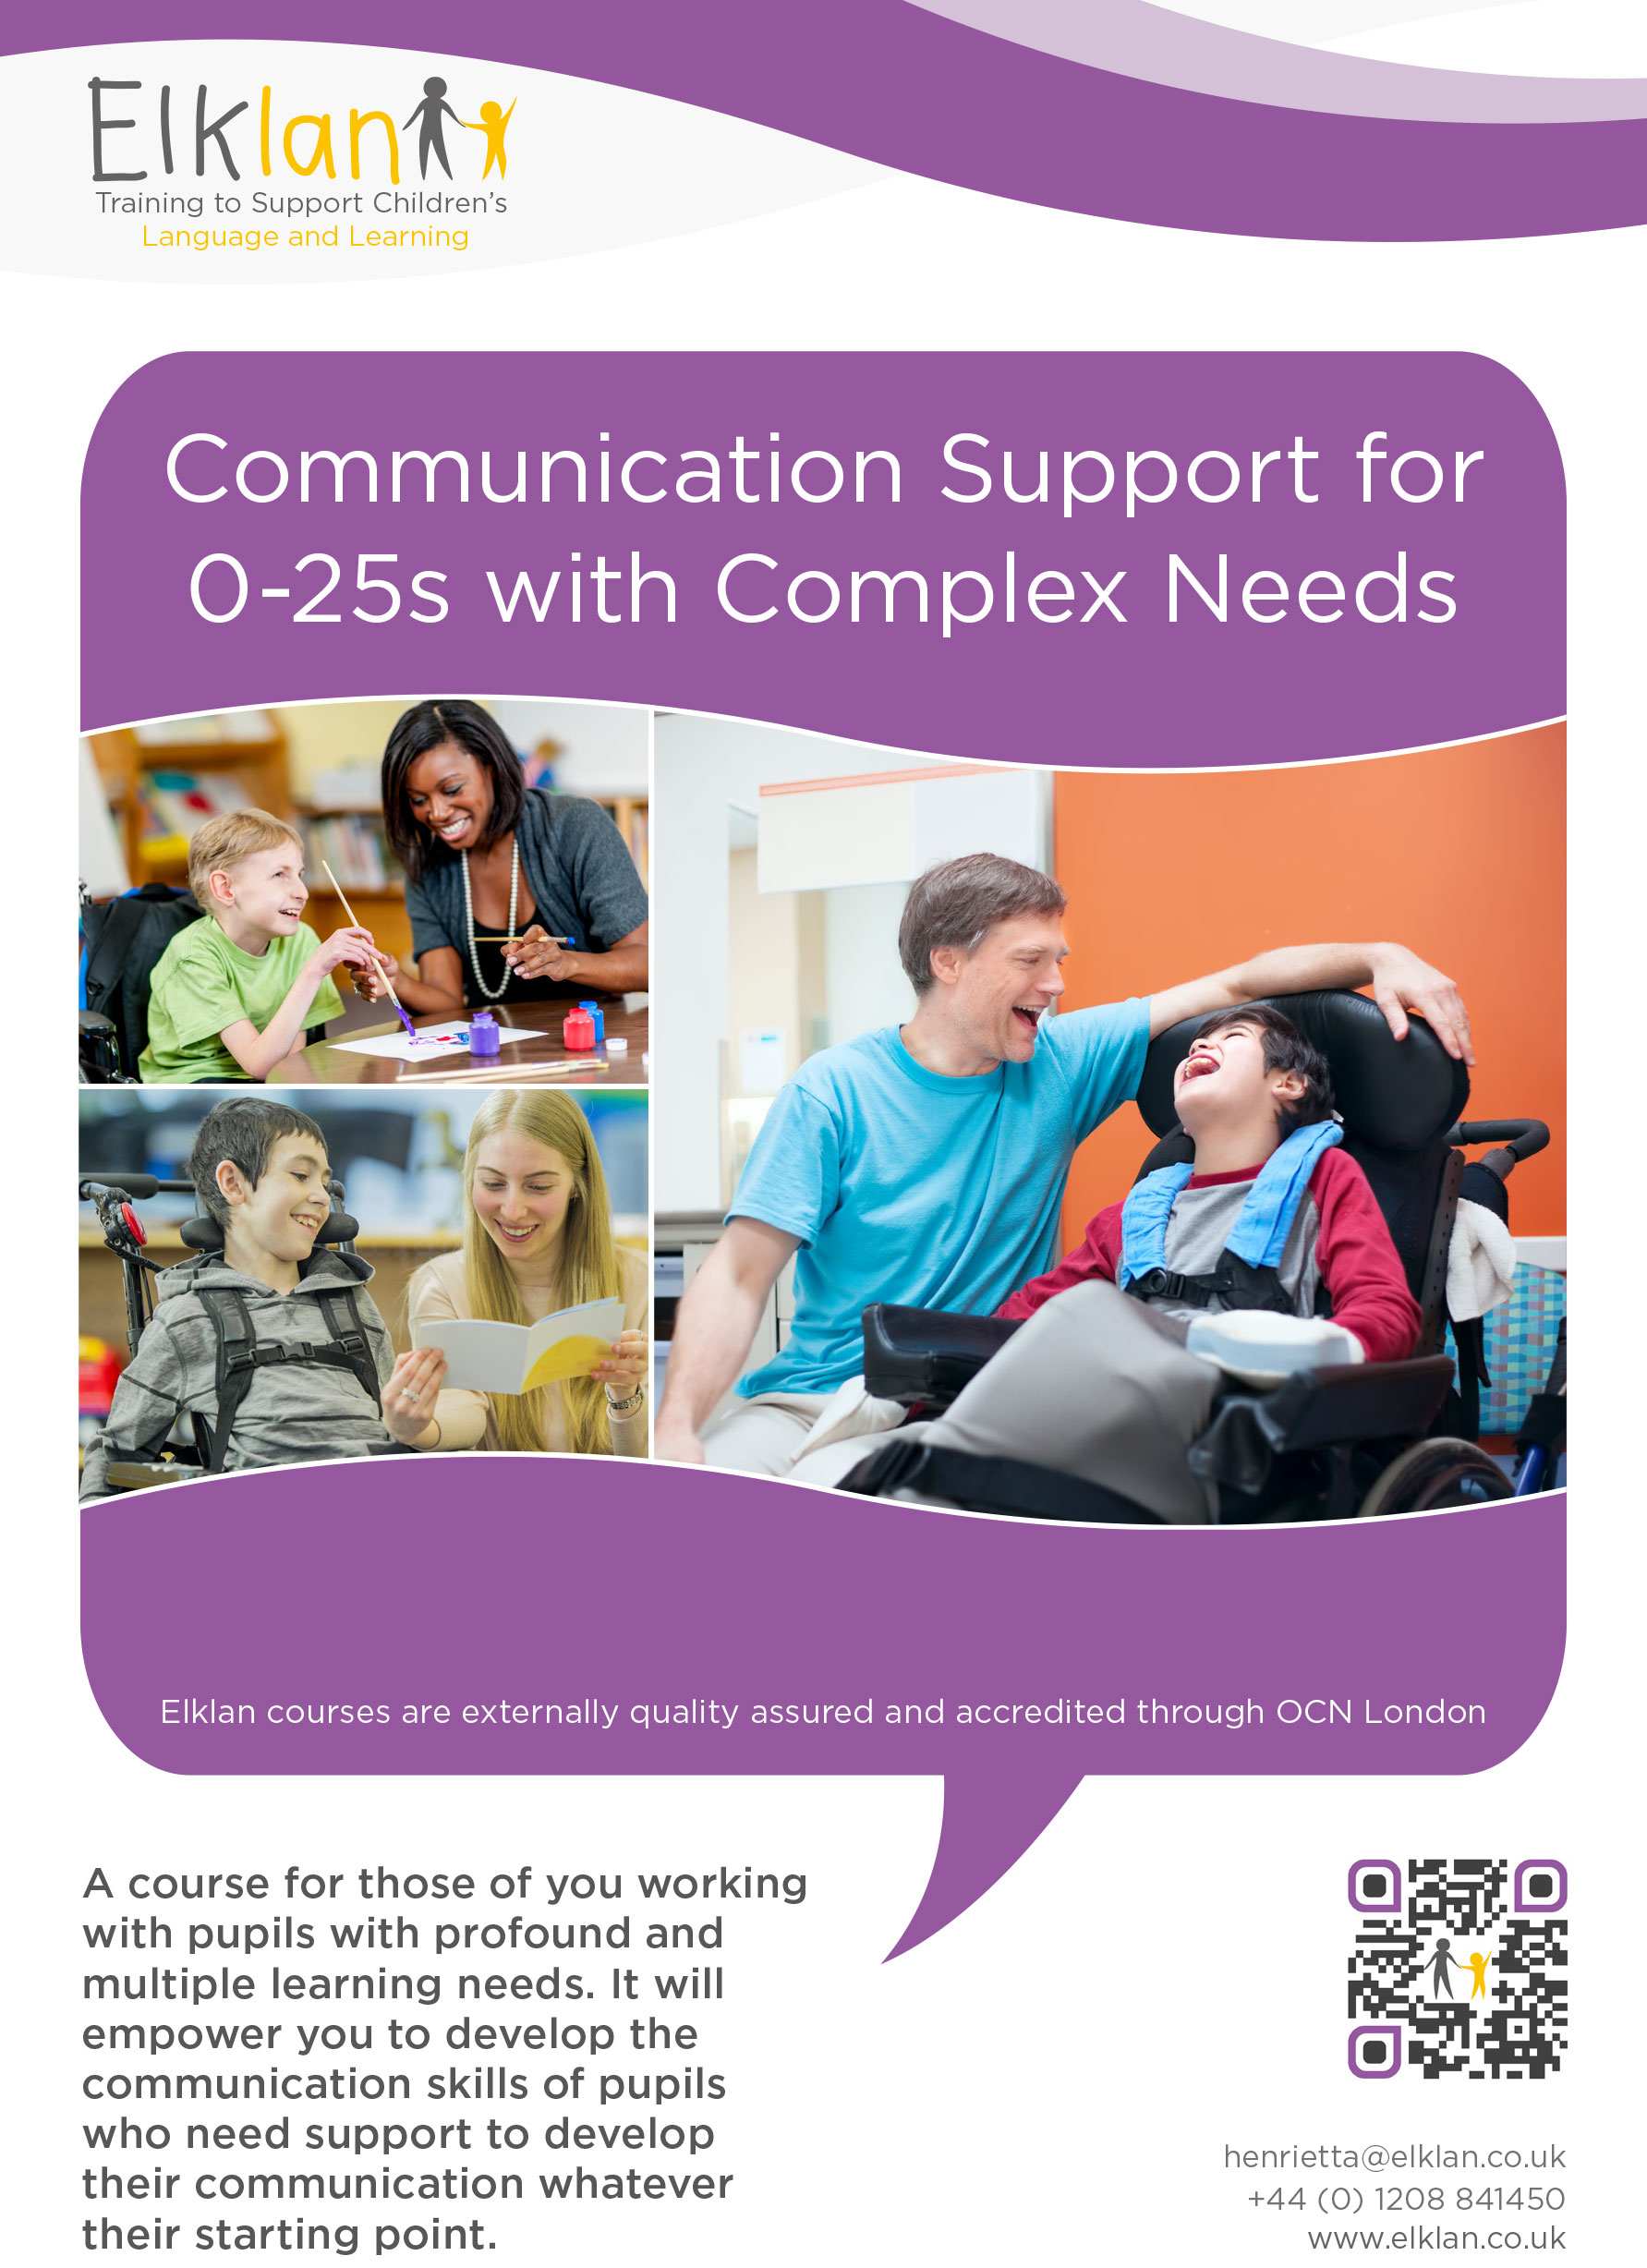 Communication Support for 0-25s with Complex Needs flyer - 100 copies